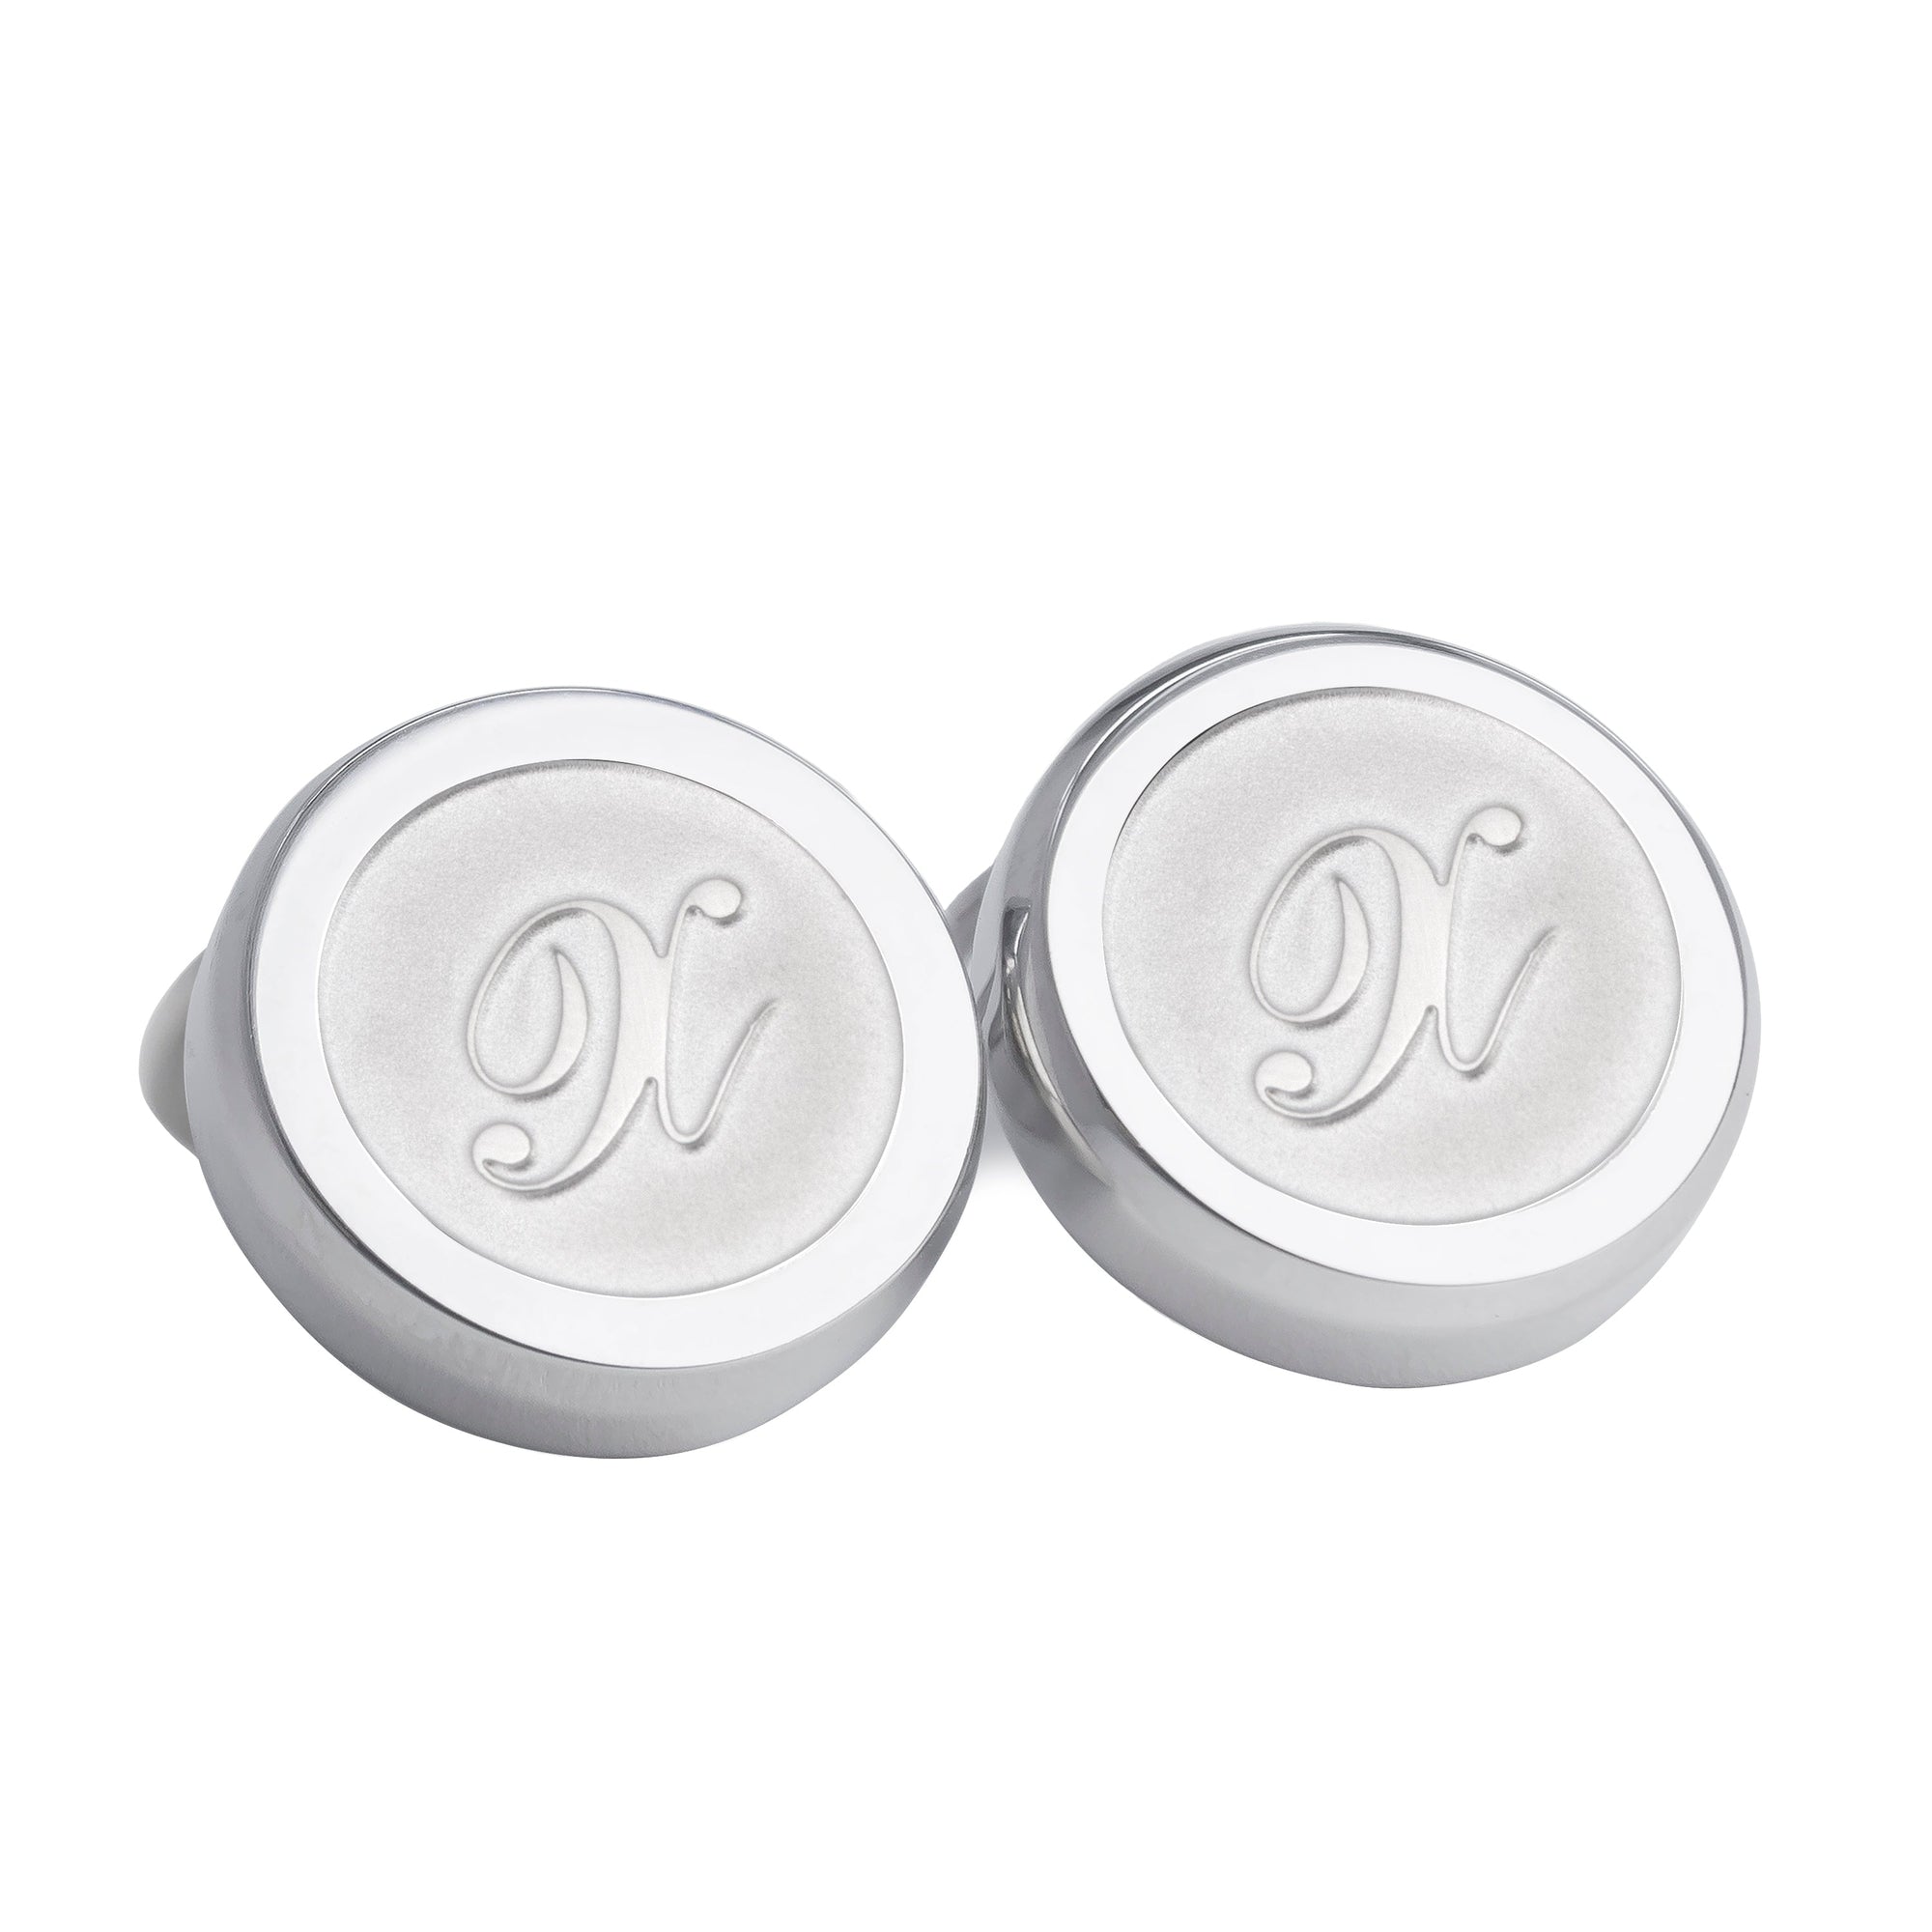 Monogram Etched Silver Clip-on Button Covers-Button Covers-A.Azthom-X-Cufflinks.com.sg